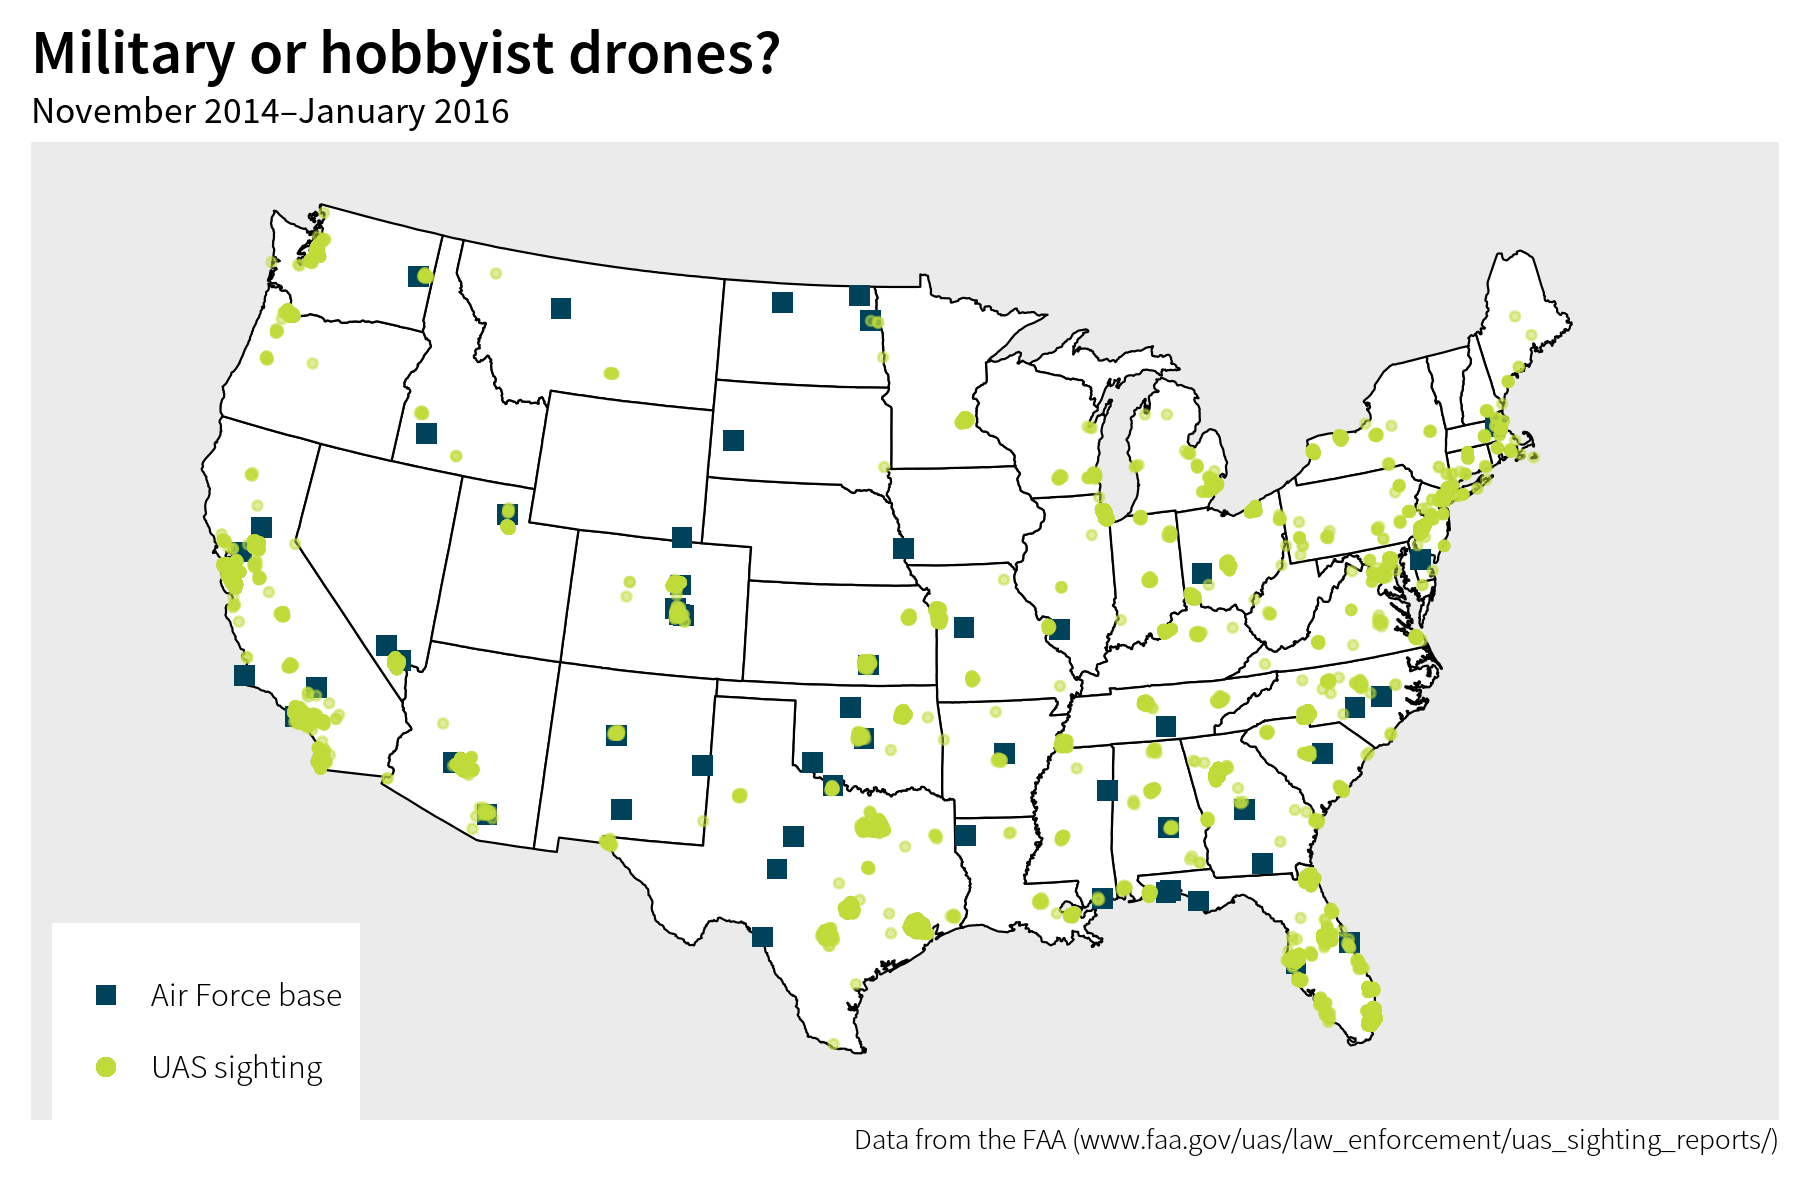 Drone sightings in the US, visualized